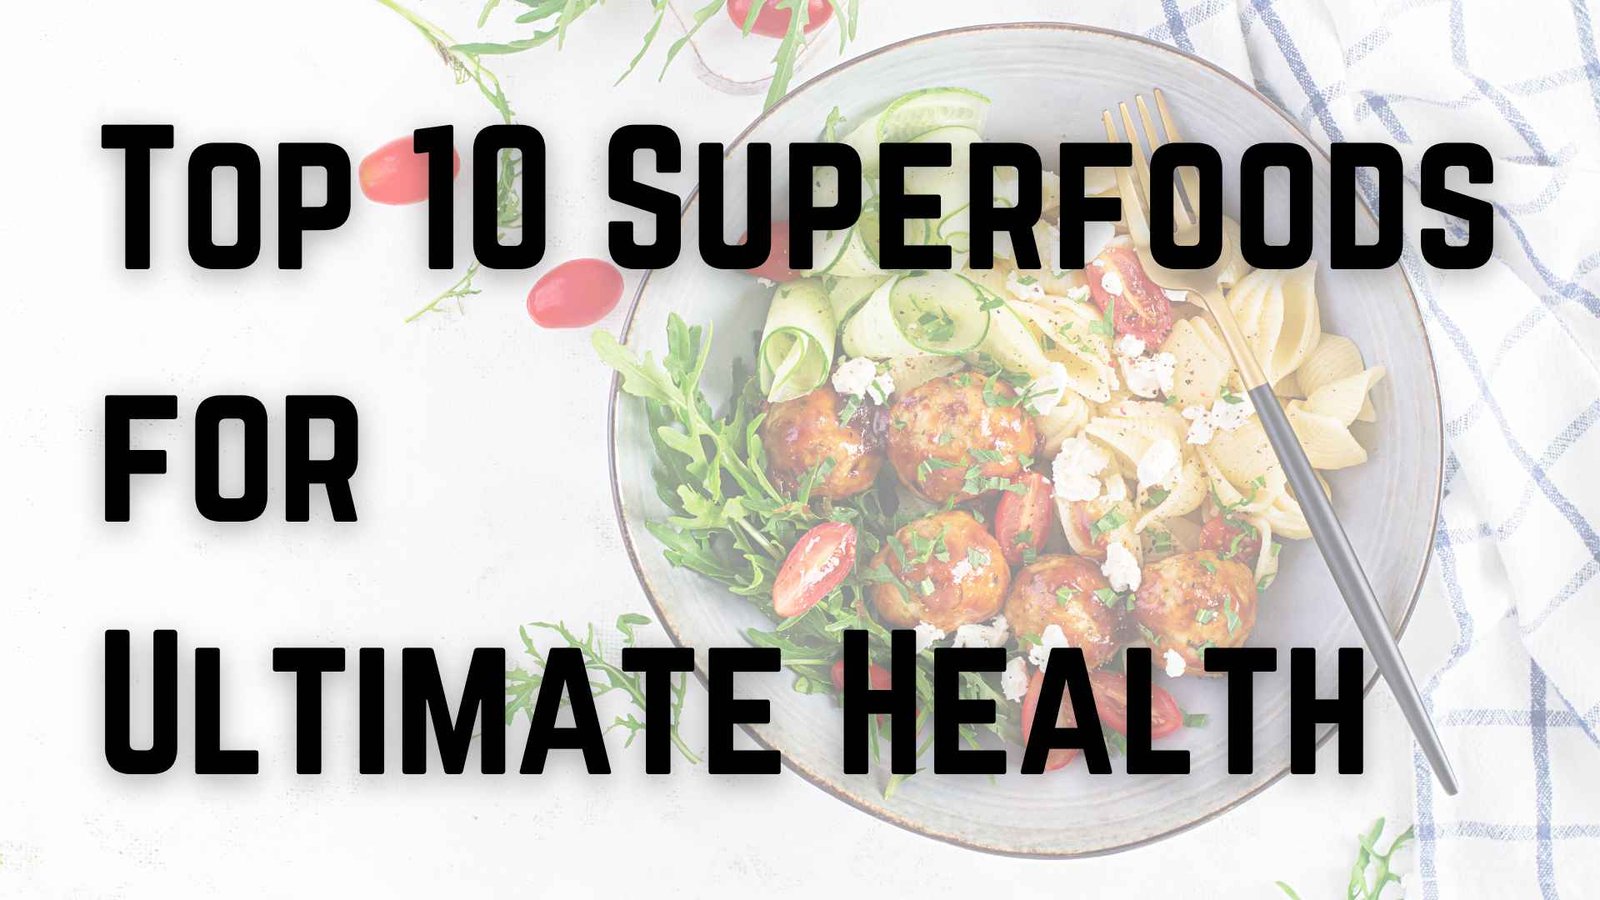 Top 10 Superfoods for Ultimate Health title